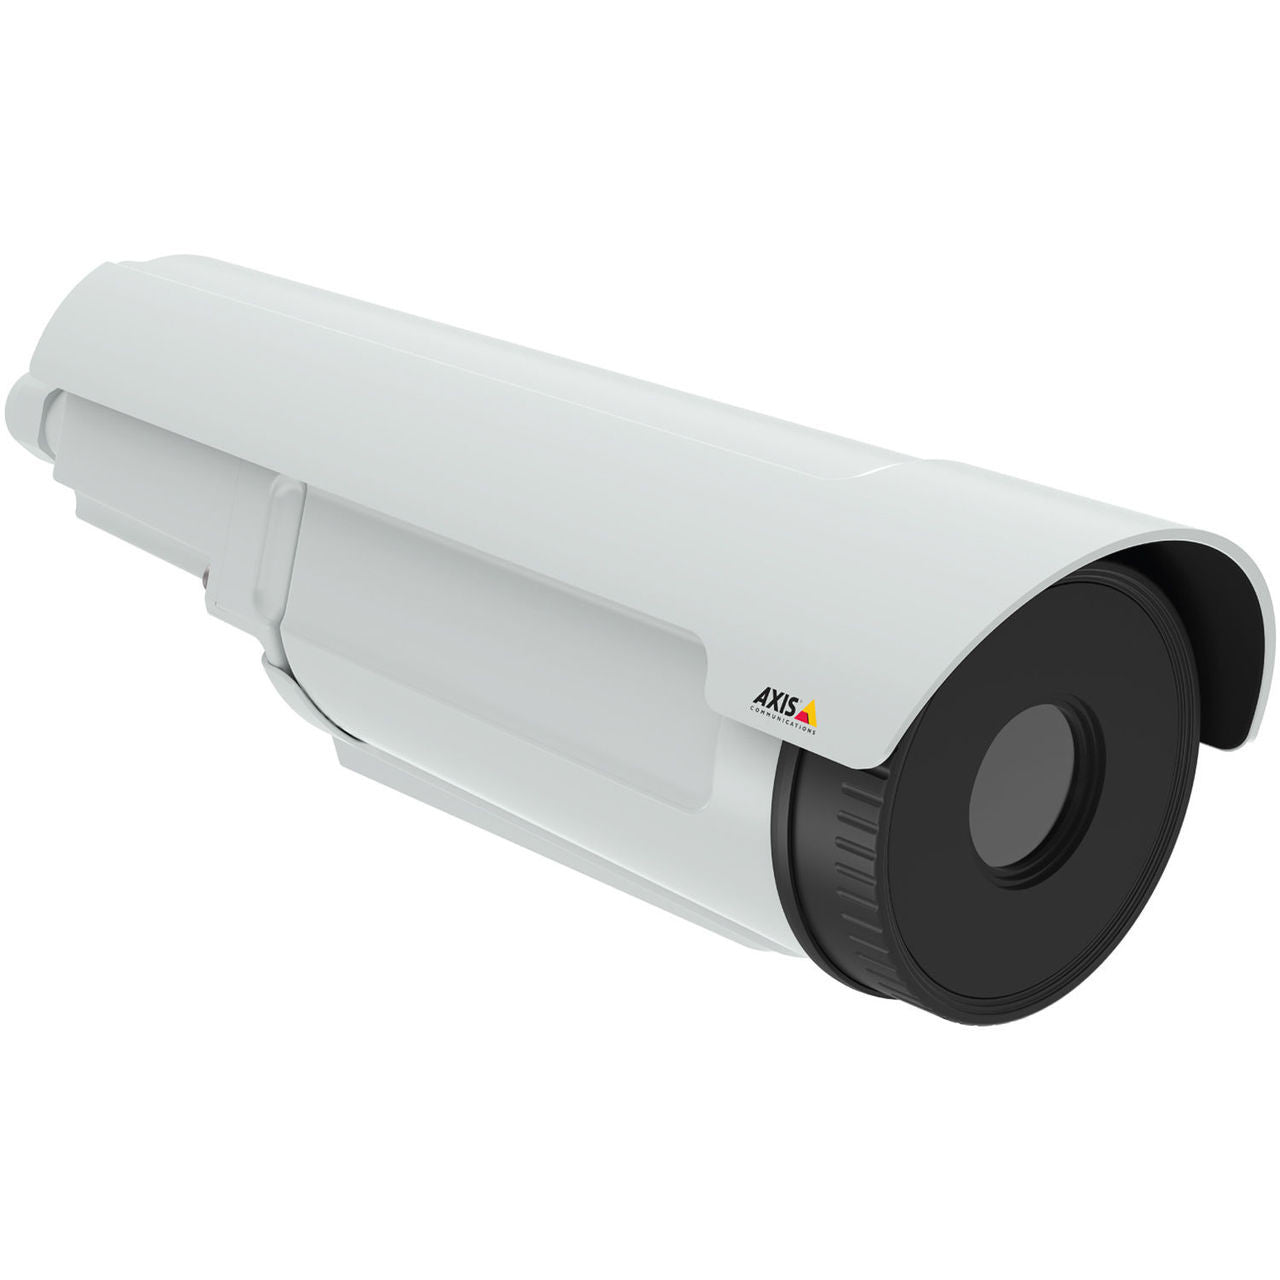 AXIS Q1942-E PT Mount (0986-001) 60mm 8.3fps Thermal Network Camera